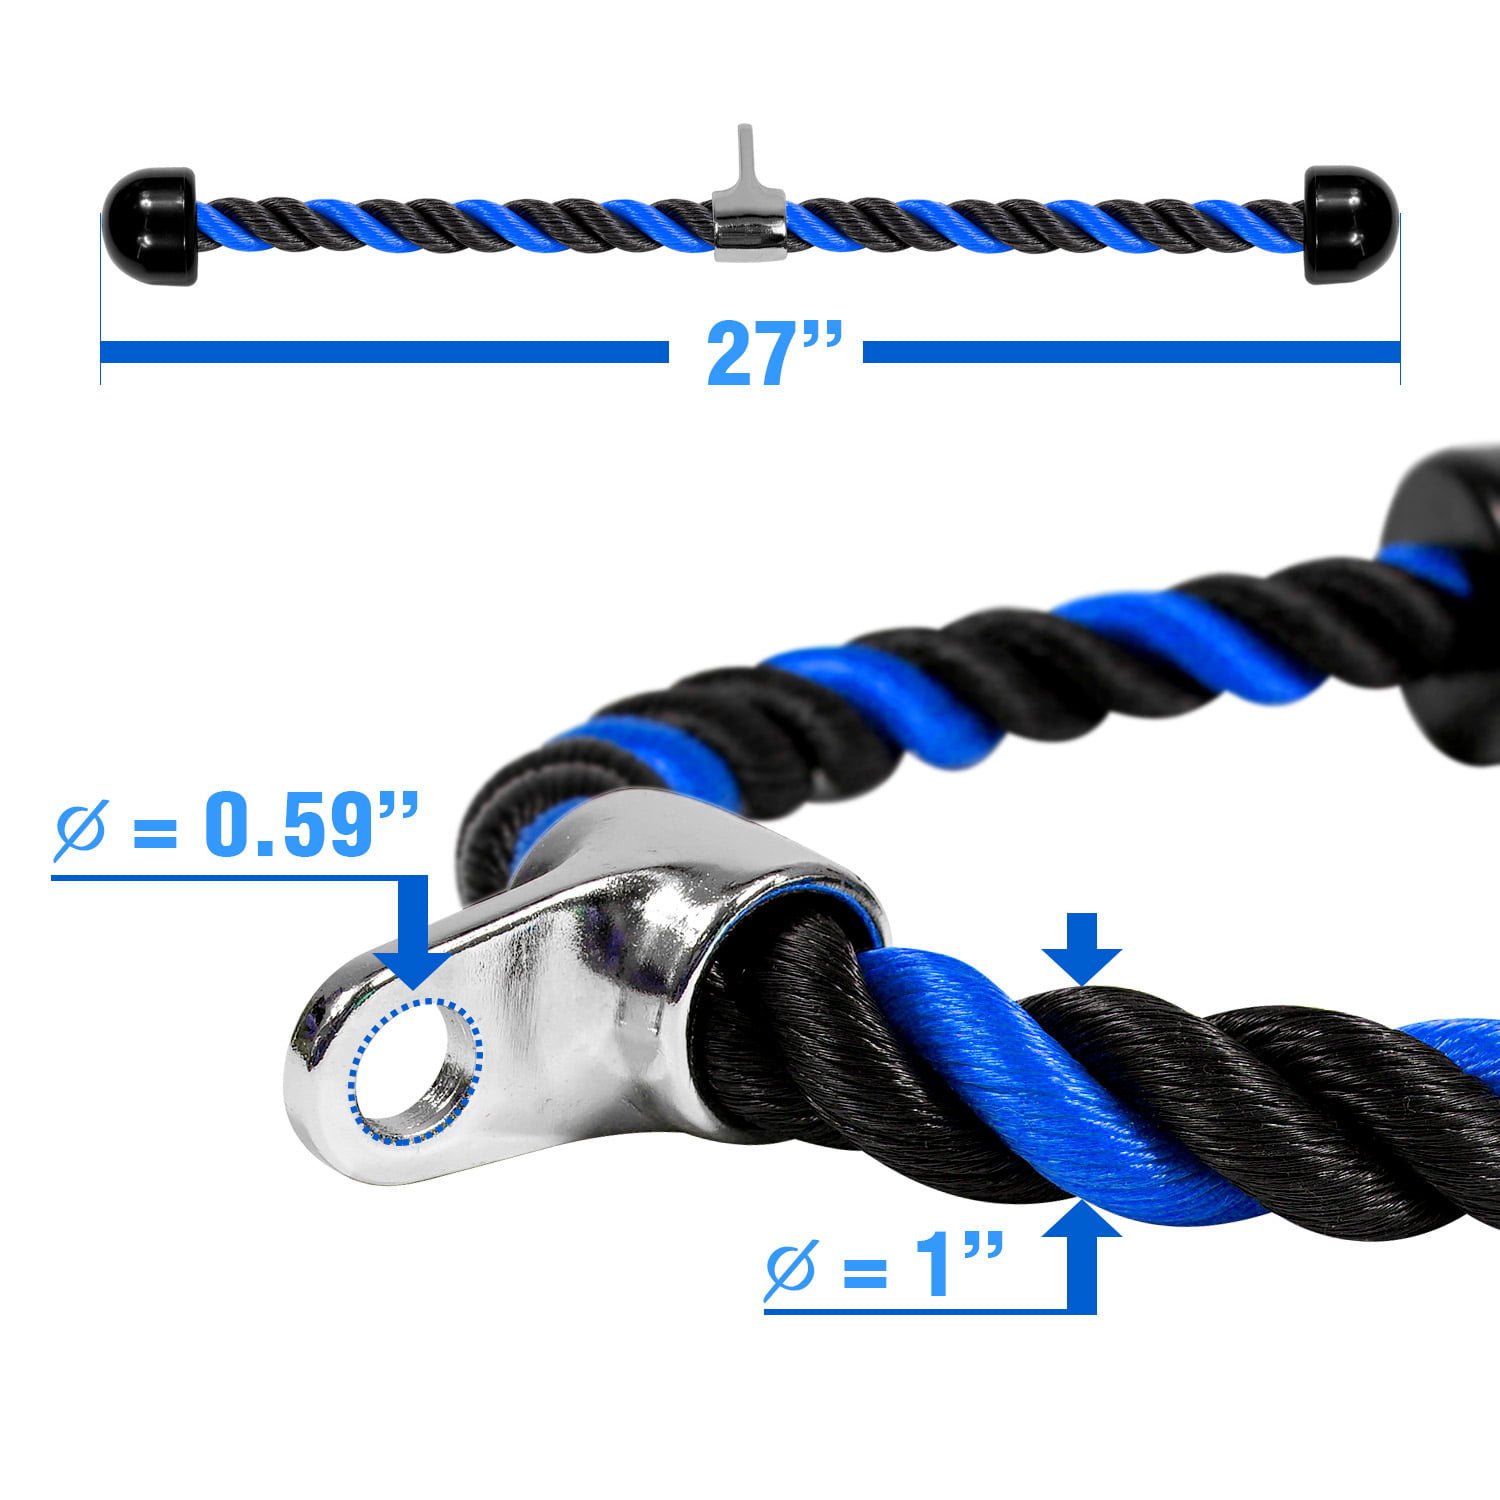 27-inch Heavy Duty Coated Nylon Rope Easy to Grip & Non Slip Cable Attachment with Solid Rubber Ends and Chrome Plated Attachment Tricep Rope Pull Down 